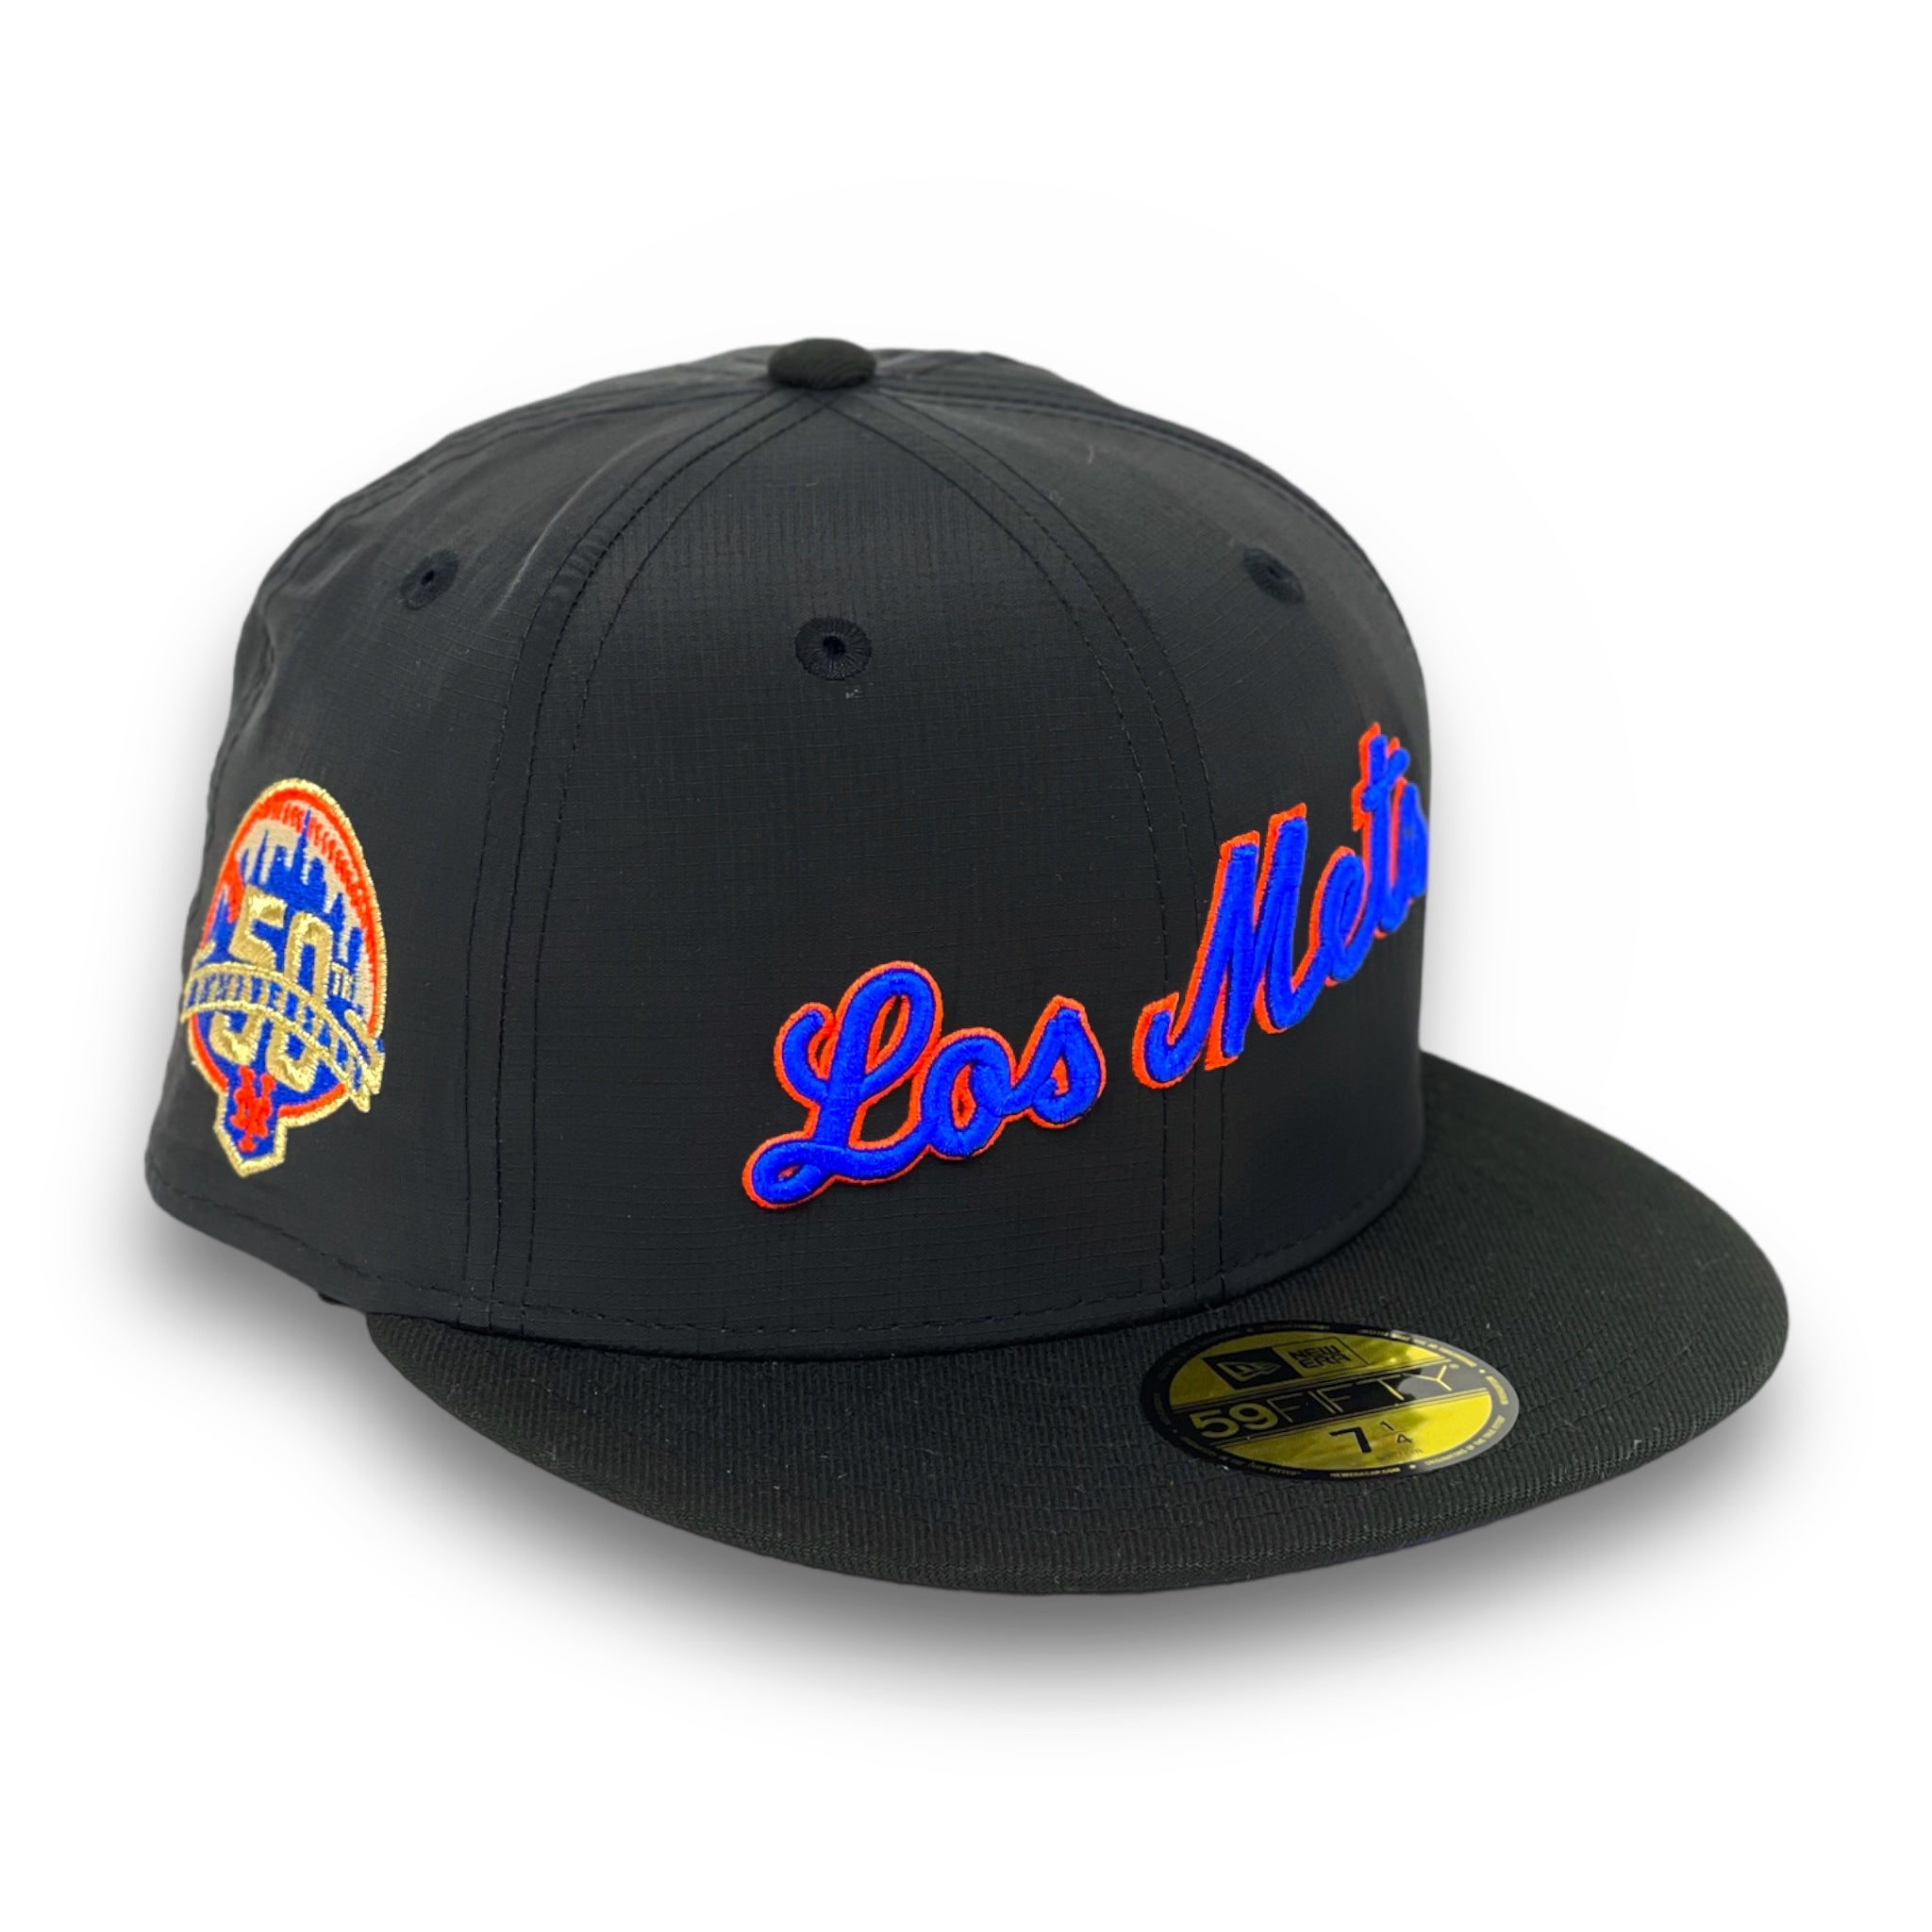 Los Mets New York Mets 60th Anniversary New Era 59FIFTY Fitted Hat (Royal Blue Black Green Under BRIM) 7 3/4